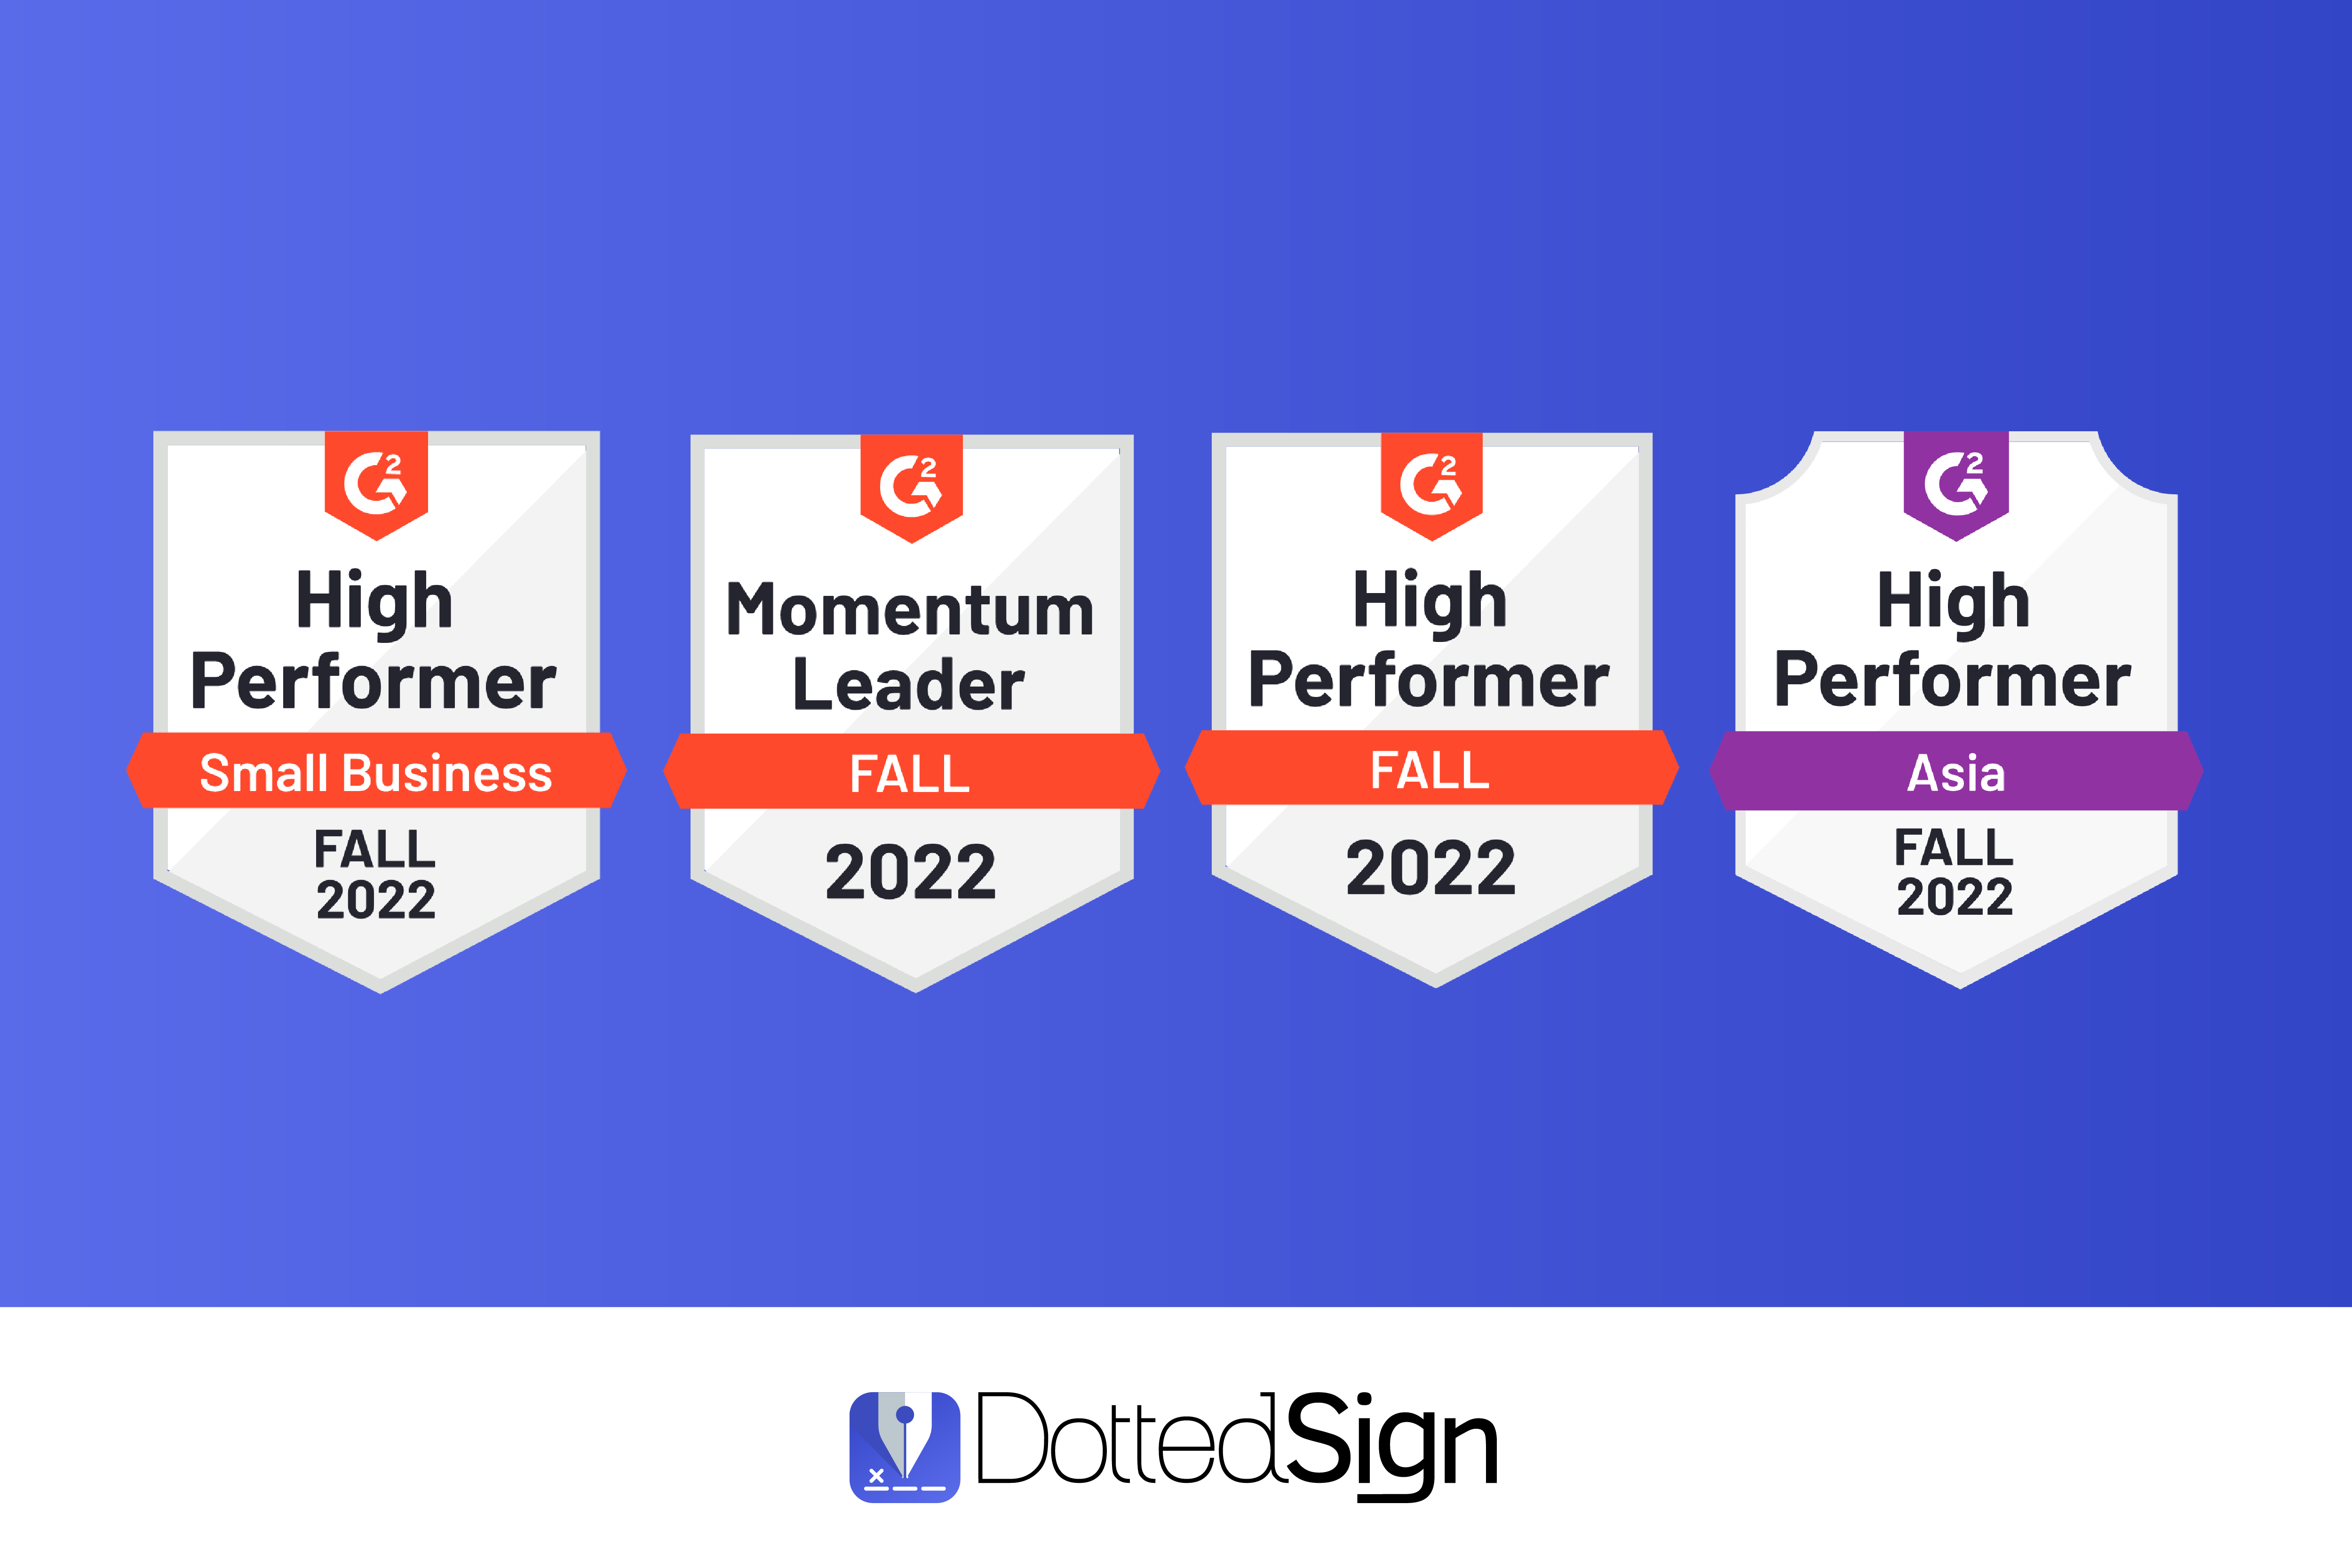 DottedSign earns top ranks as the "High Performer" in G2's 2022 Fall Report for small businesses